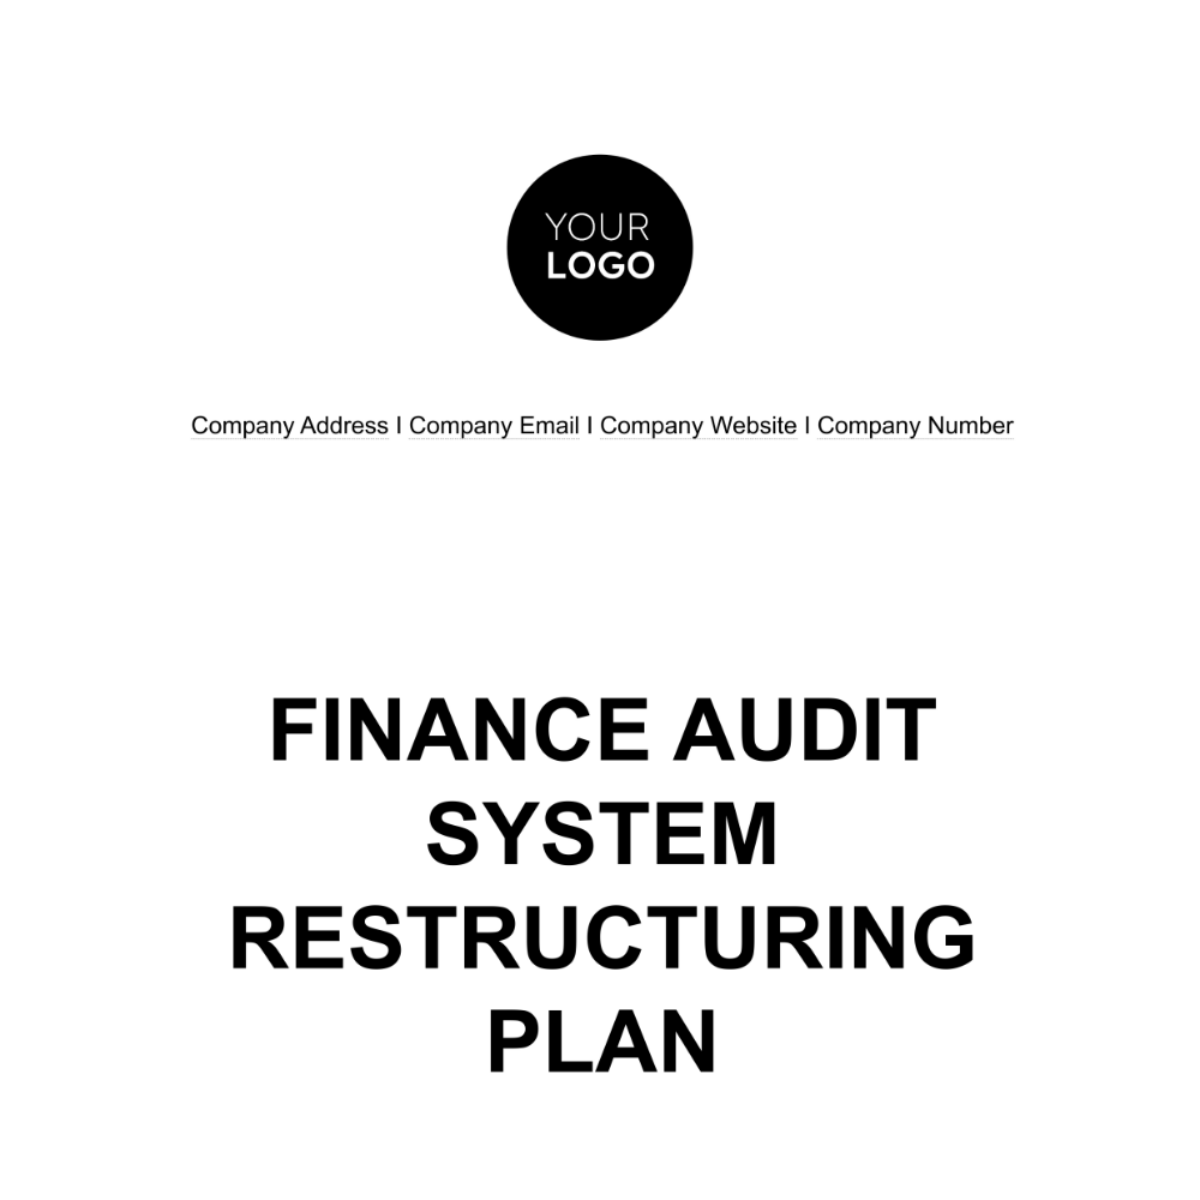 Free Finance Audit System Restructuring Plan Template